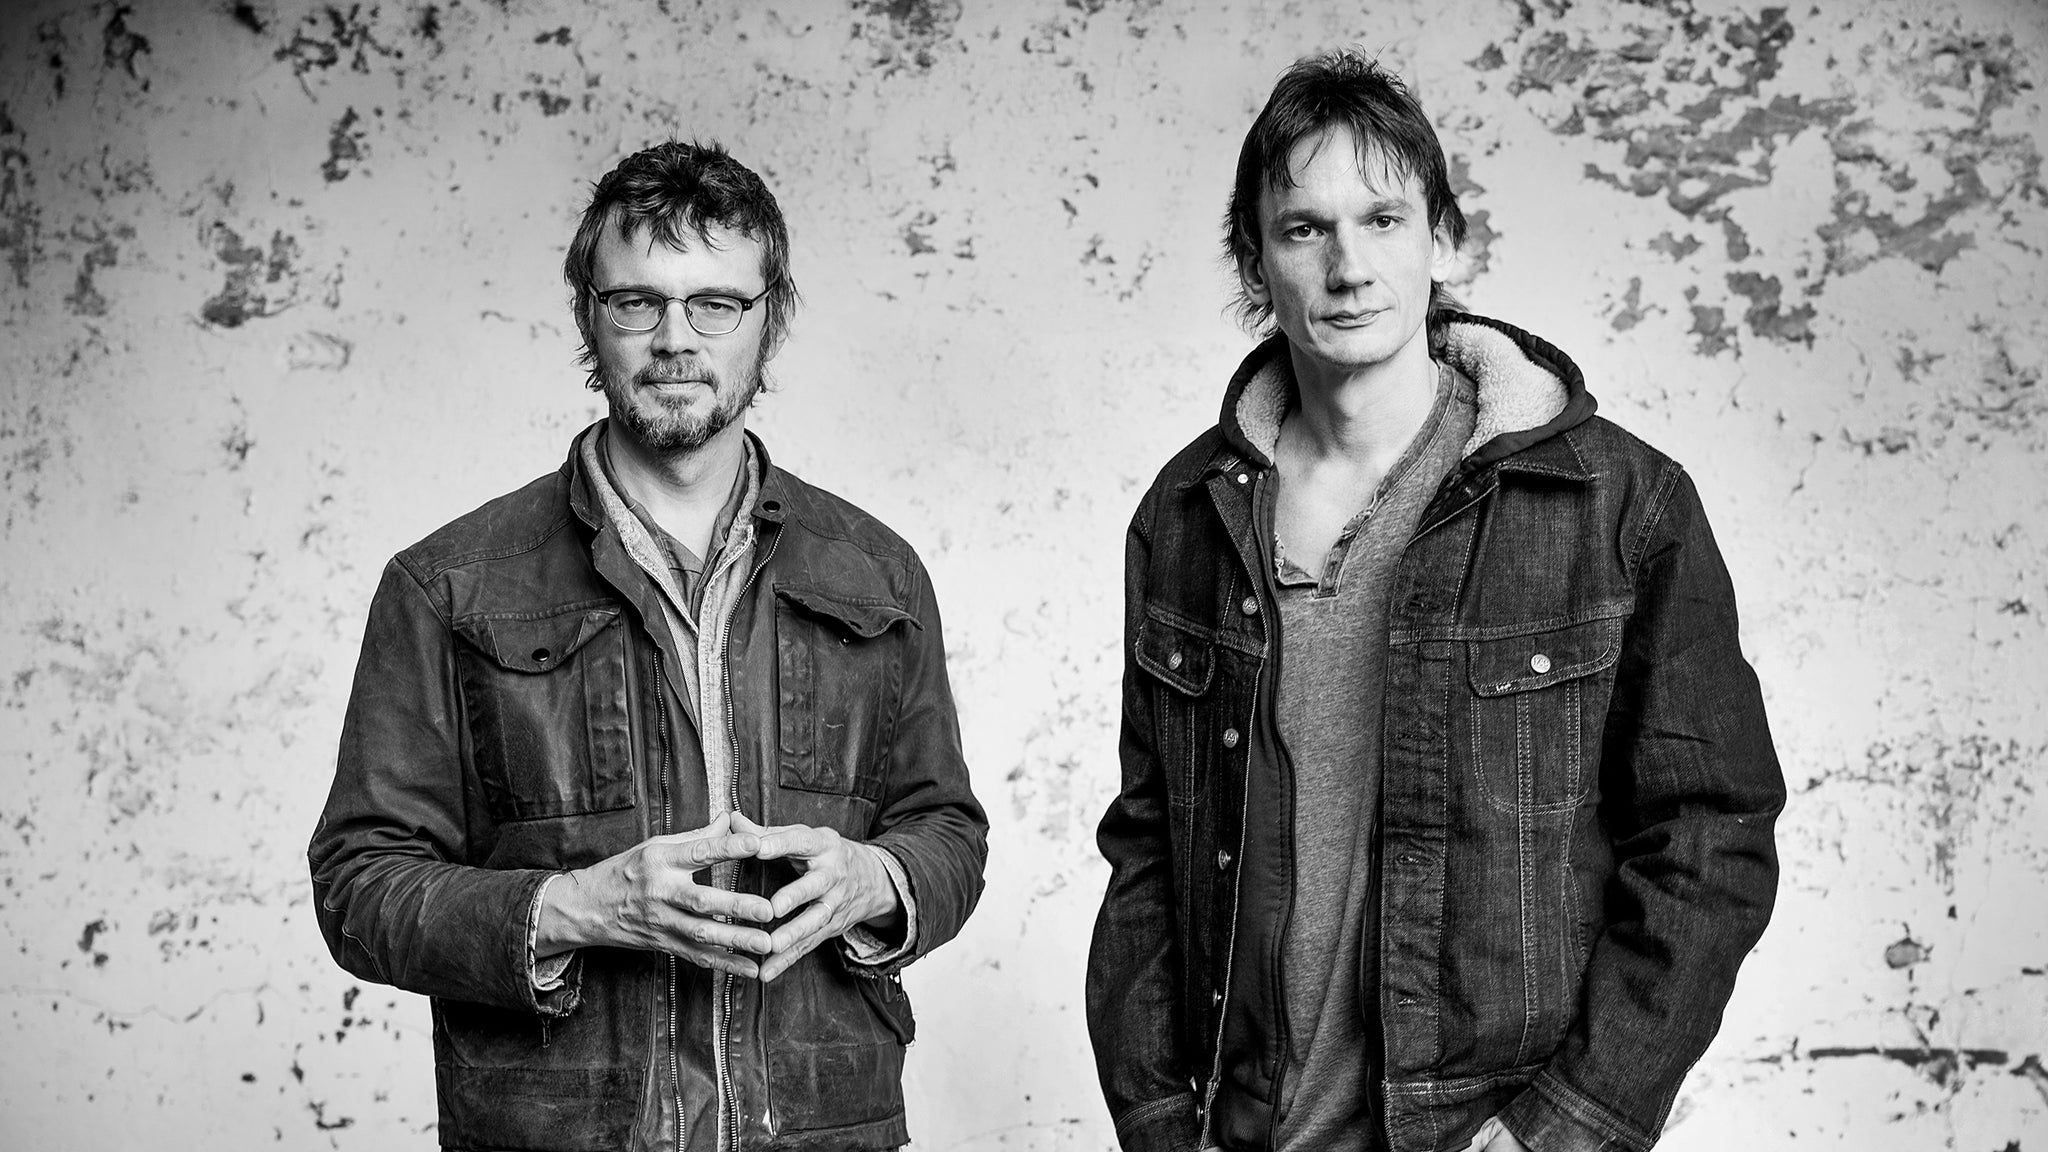 working presale code for Nolafunk Presents North Mississippi Allstars,Tab Benoit, Samantha Fish affordable tickets in New Orleans at Fillmore New Orleans